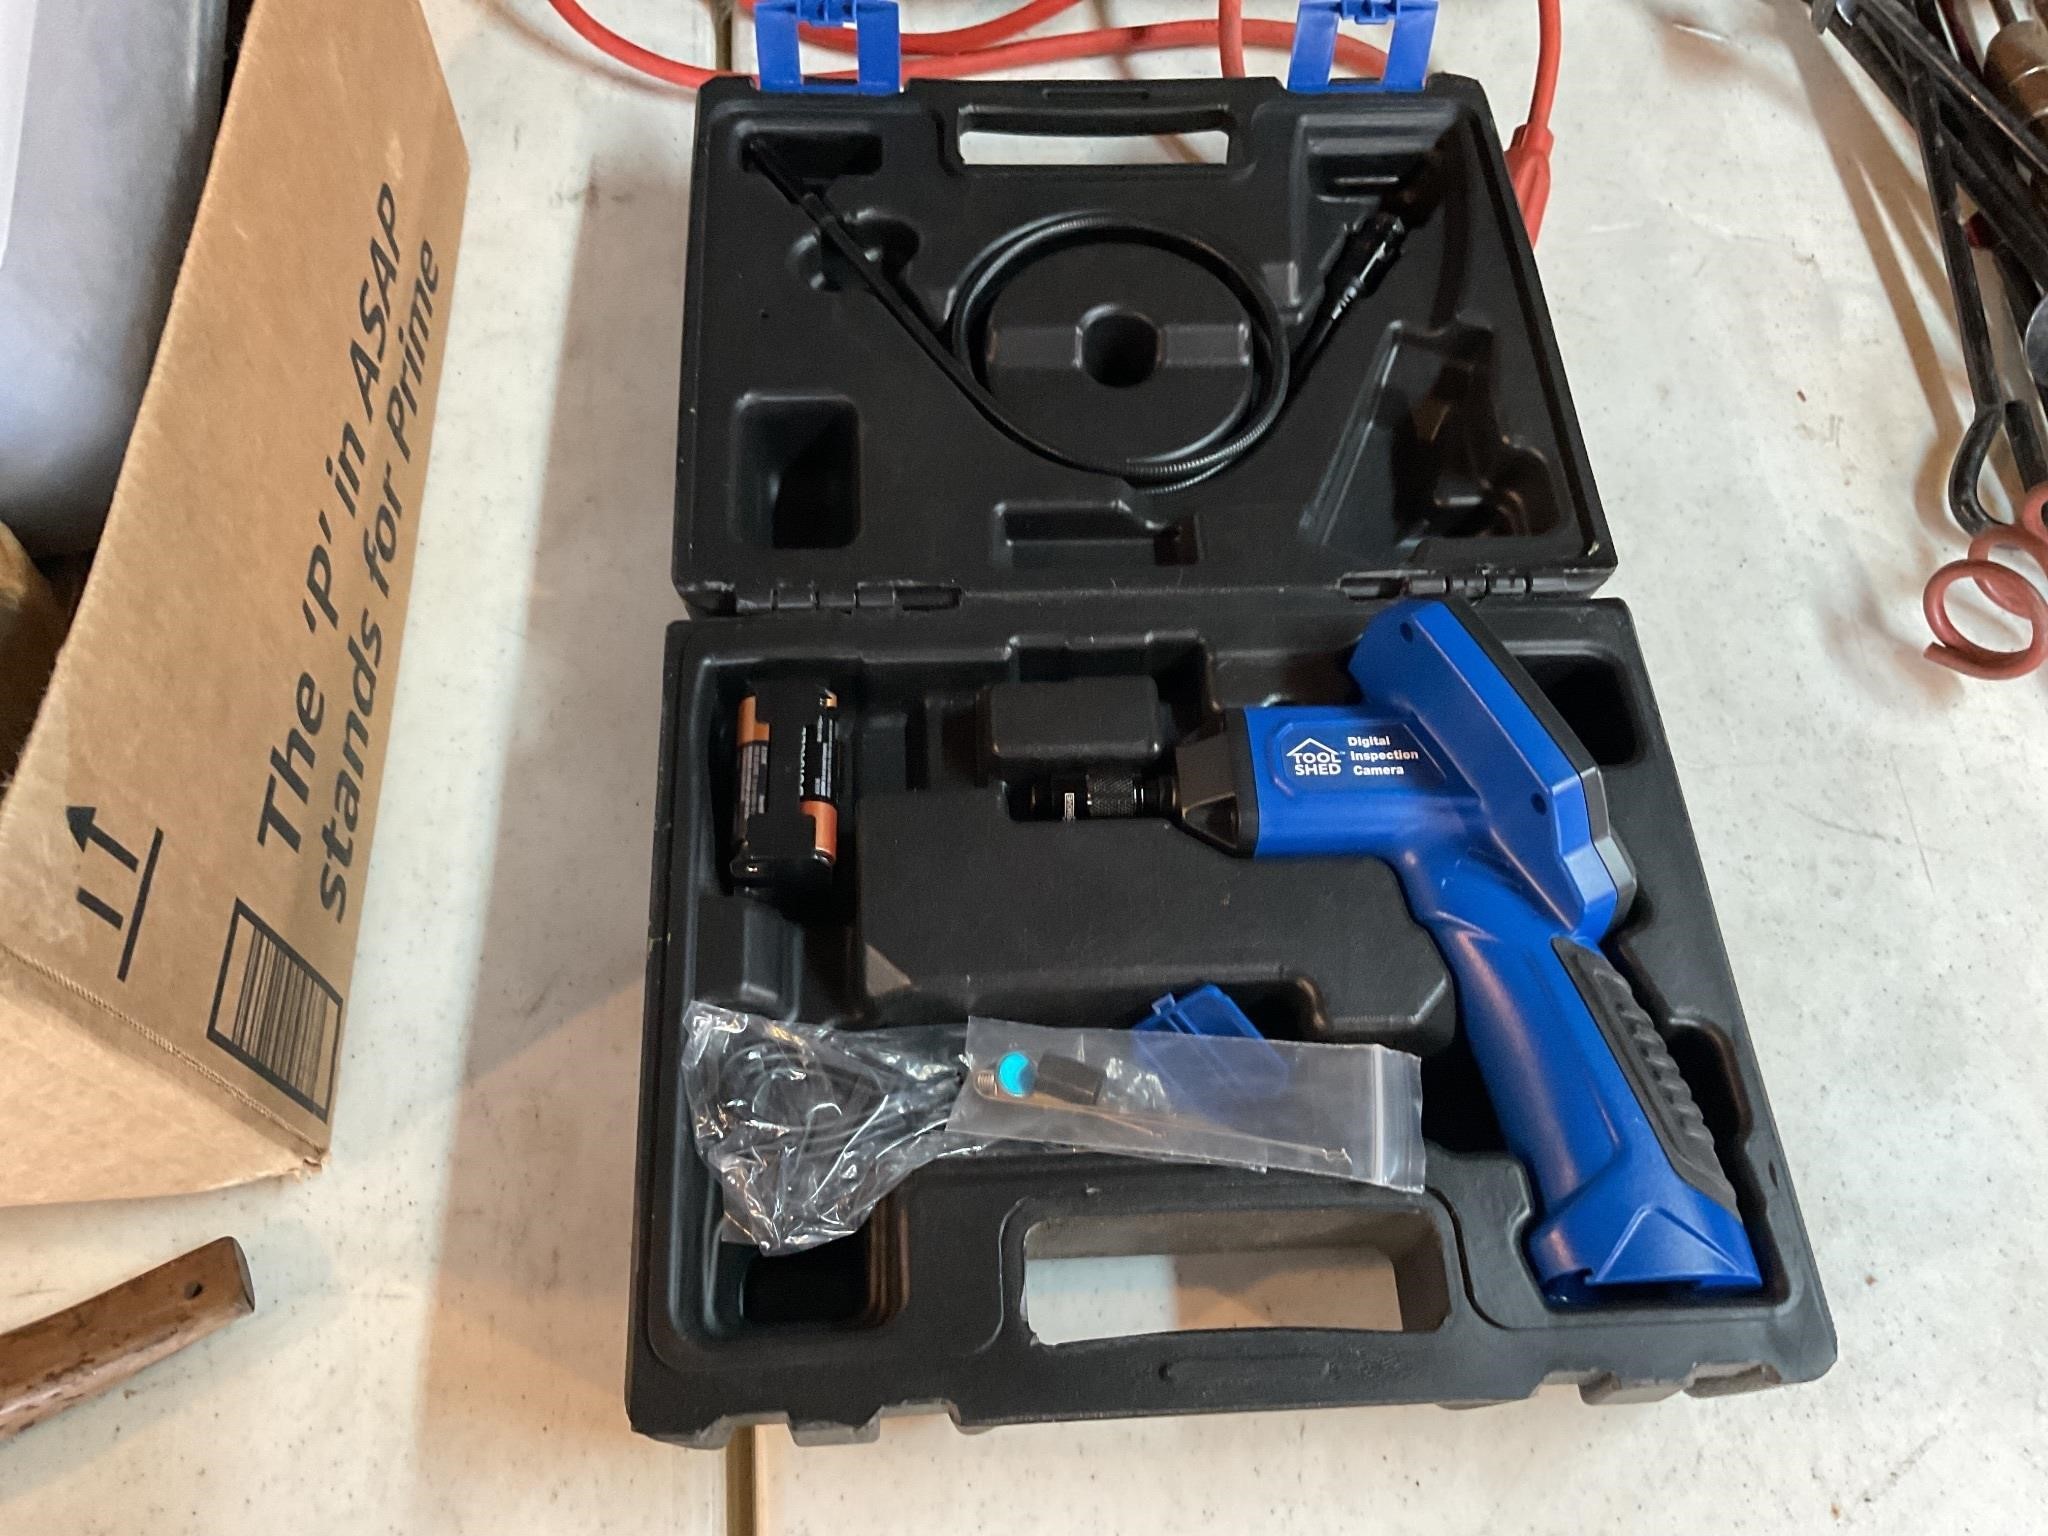 Tool shed digital inspection camera